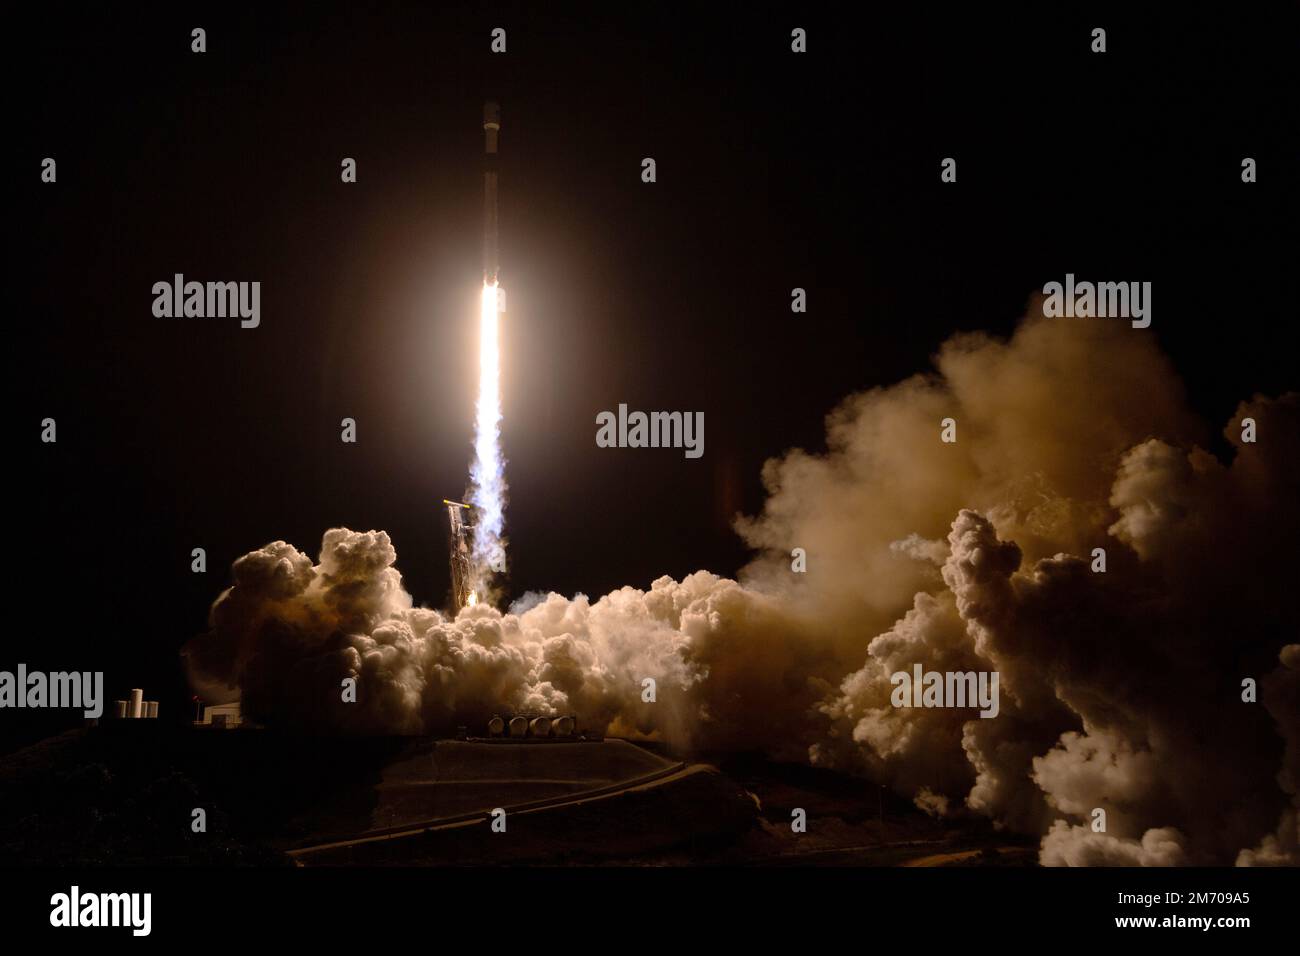 VANDENBURG SPACE FORCE BASE, CALIFORNIA, USA - 16 December 2022 - A SpaceX Falcon 9 rocket launches with the Surface Water and Ocean Topography (SWOT) Stock Photo